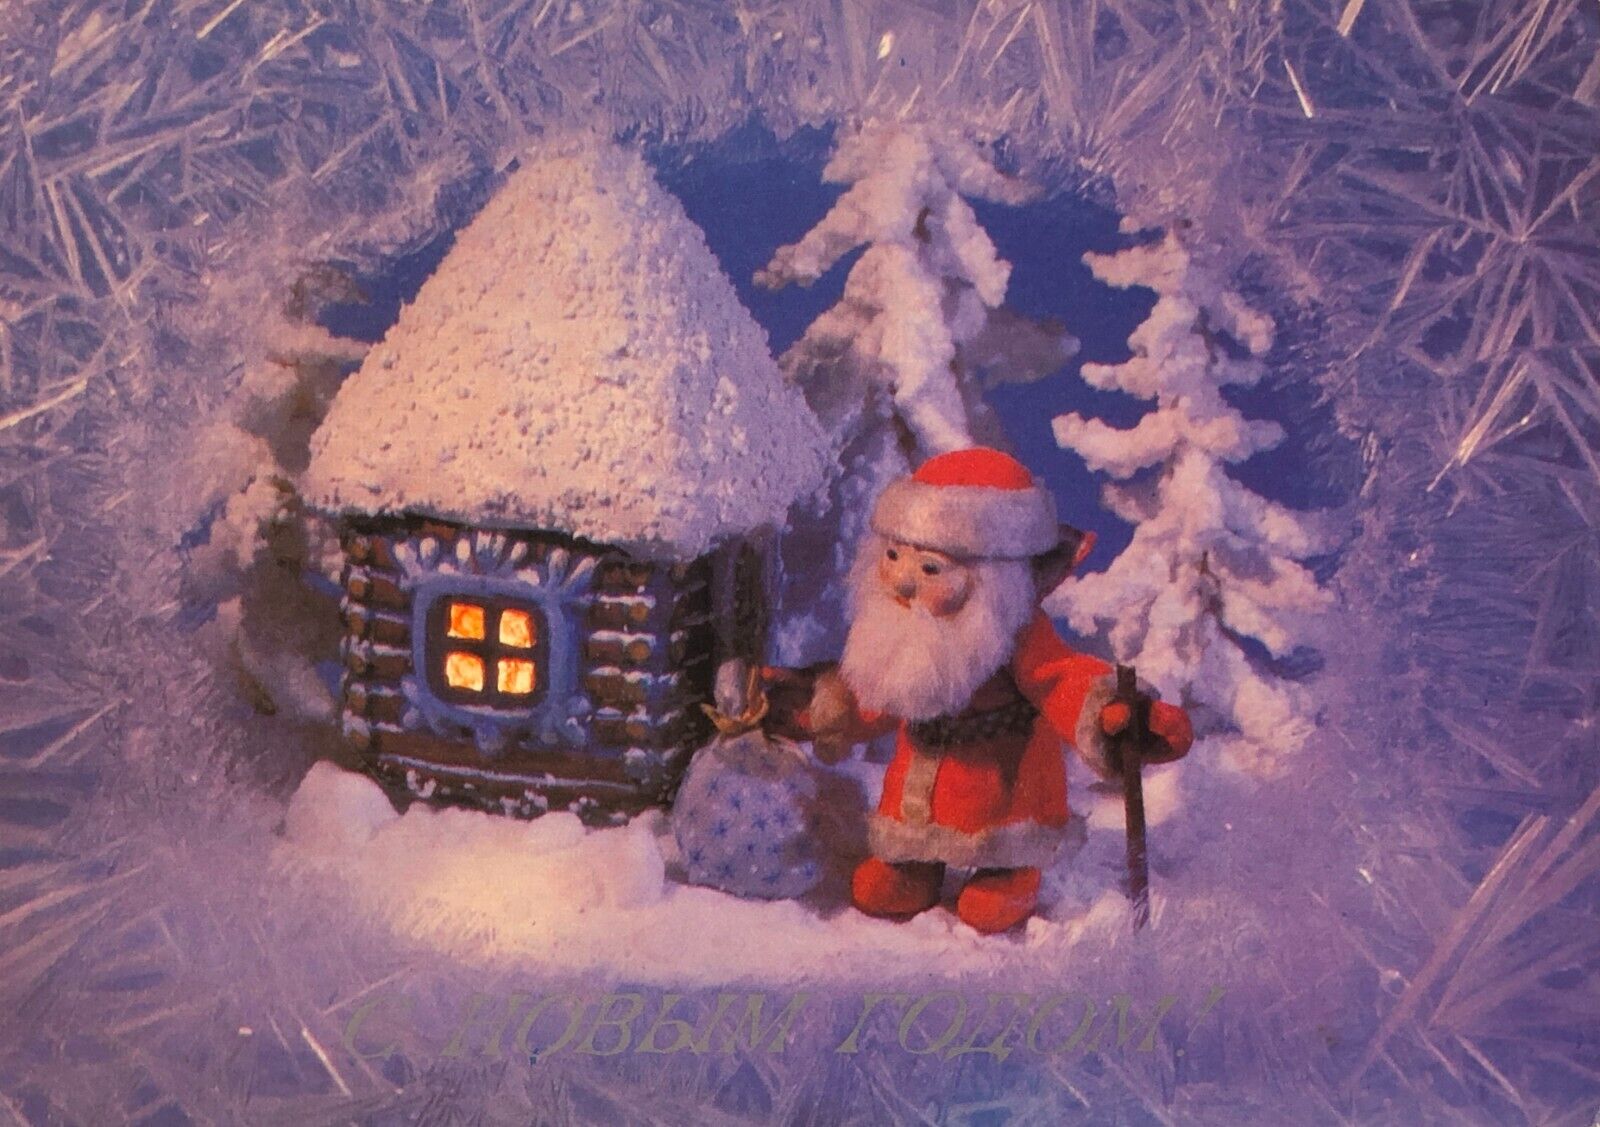 1988 Retro Holiday Postcard with Santa Claus in magical snowy woodland